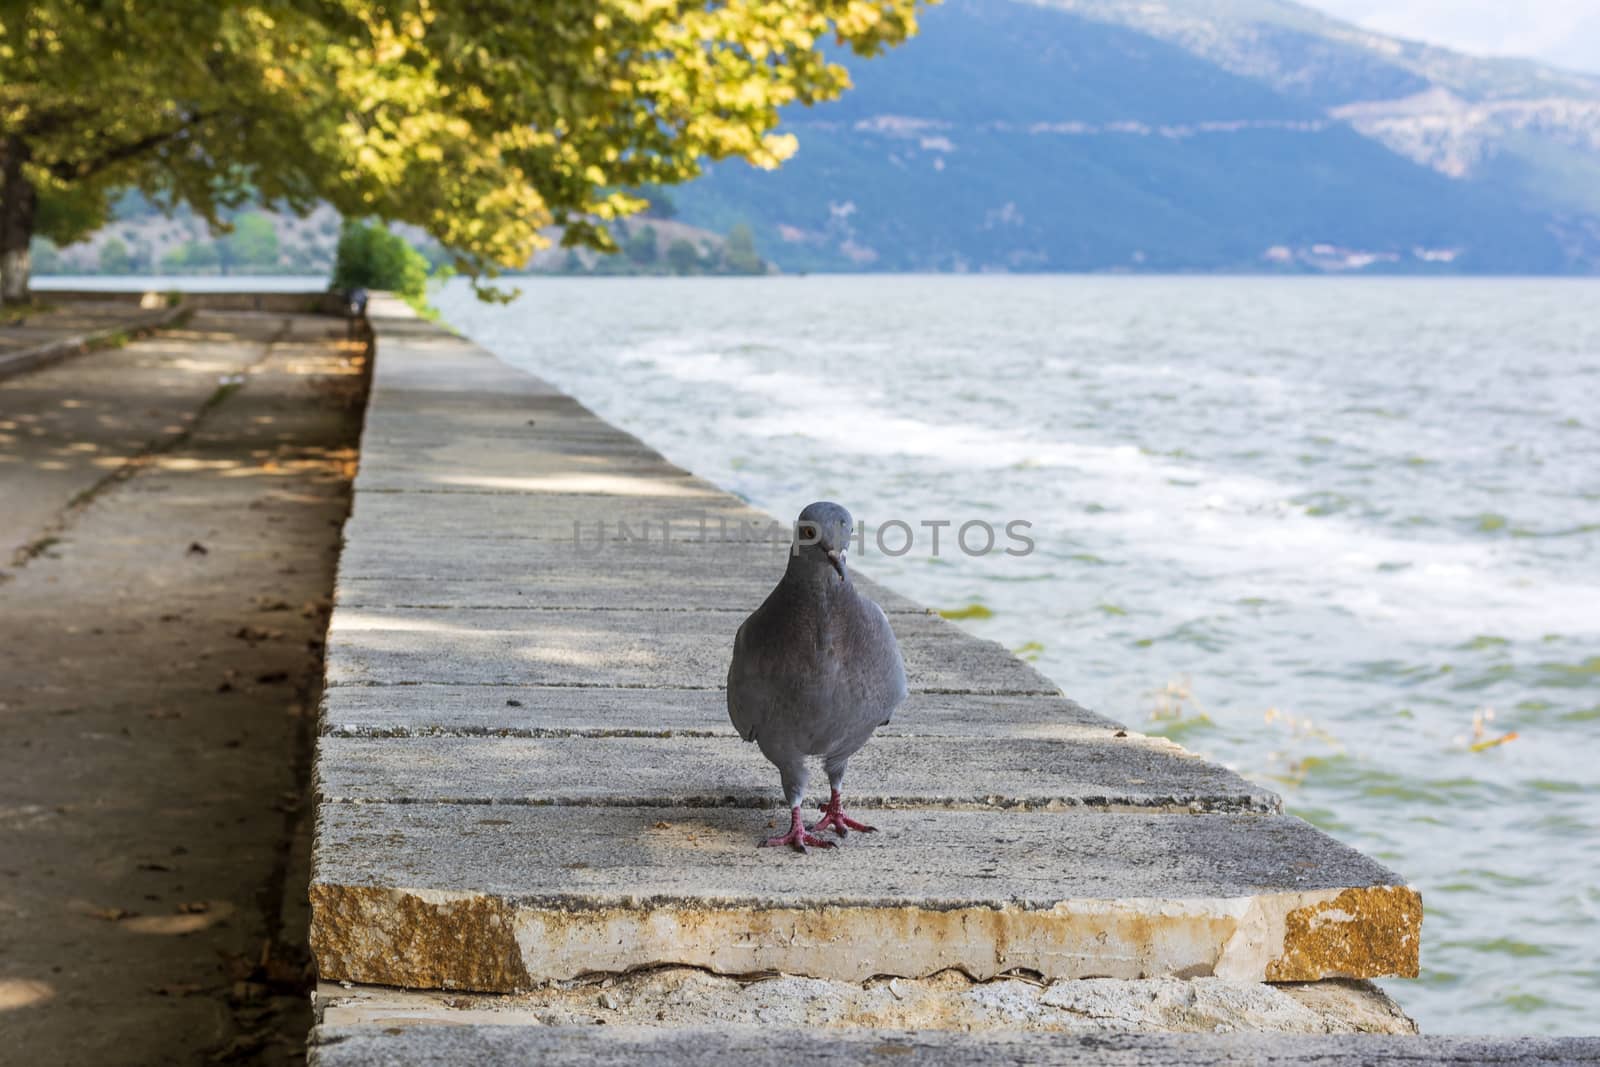 Pigeon near the lake of Ioannina on stone floor, Greece by ankarb